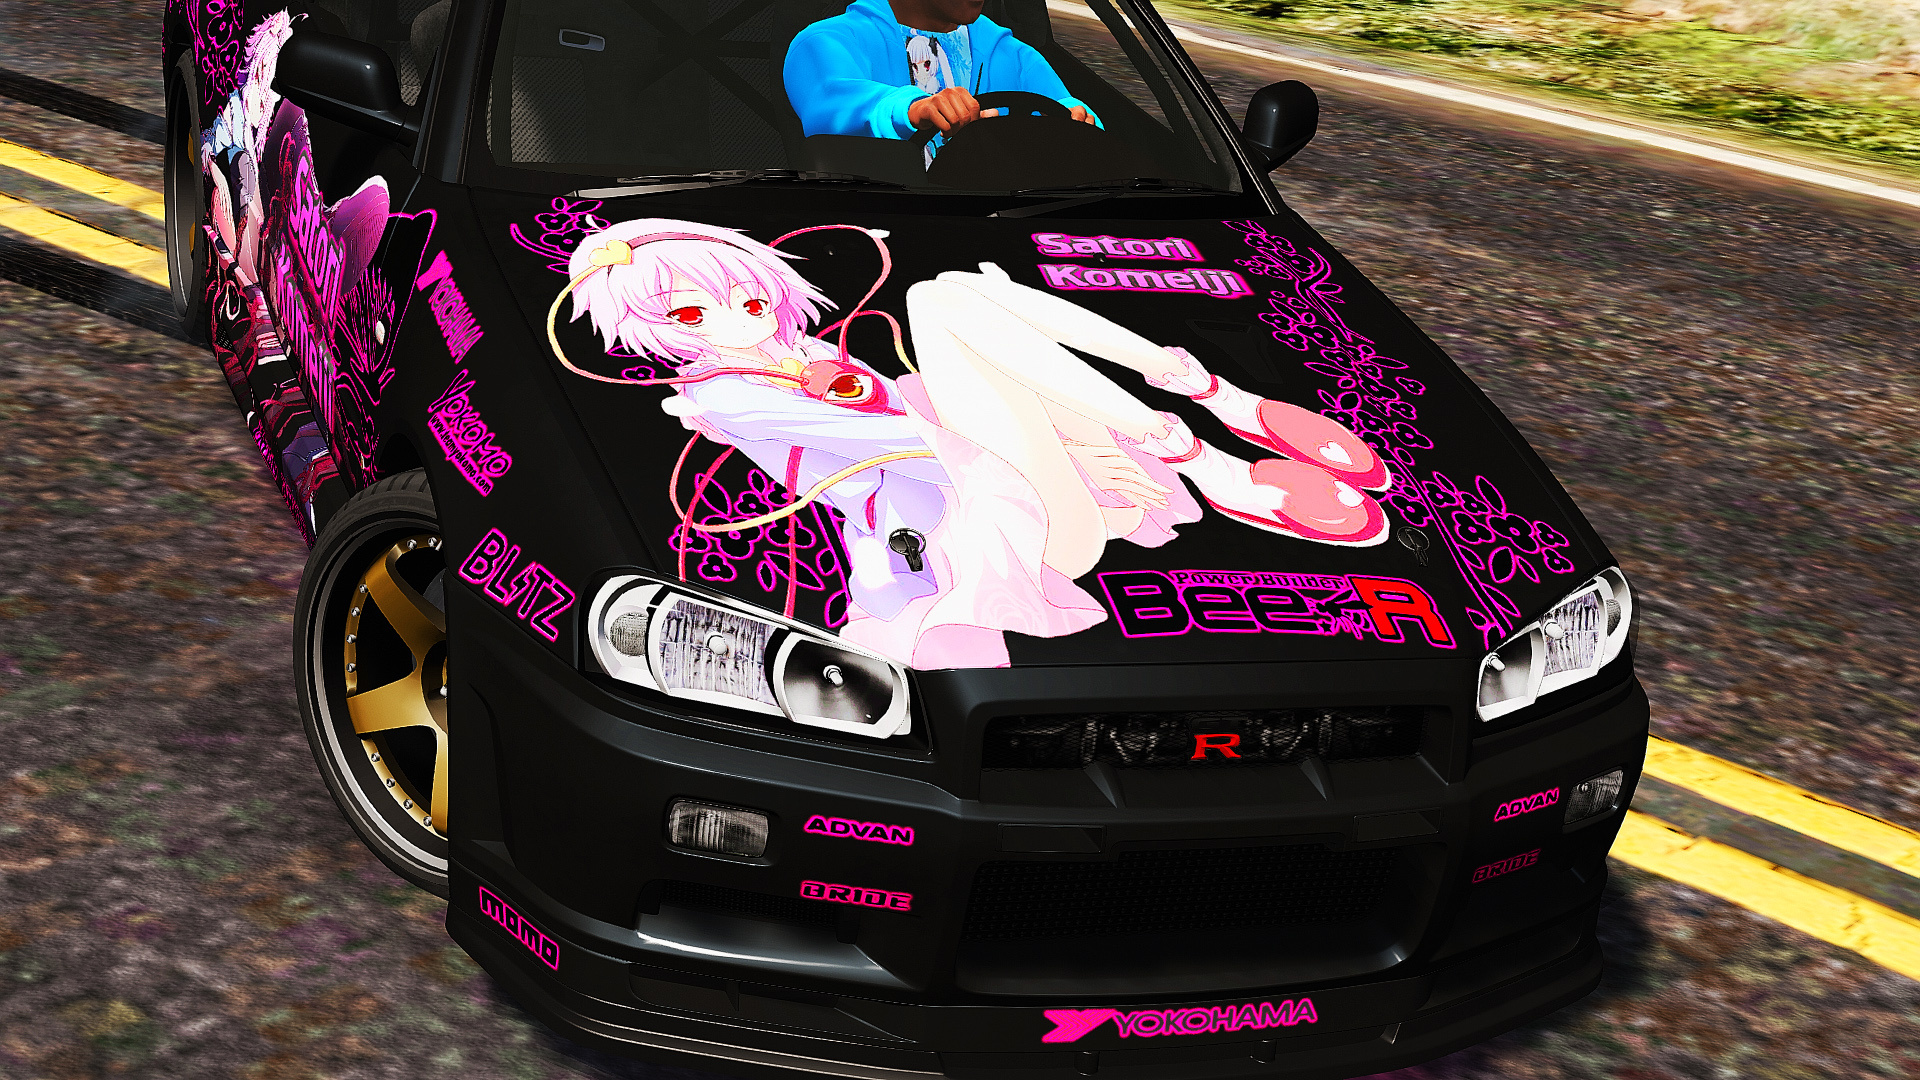 Skyline R34 Anime Girls JDM Car Picture In Picture Wallpaper -  Resolution:1920x1080 - ID:1229886 - wallha.com